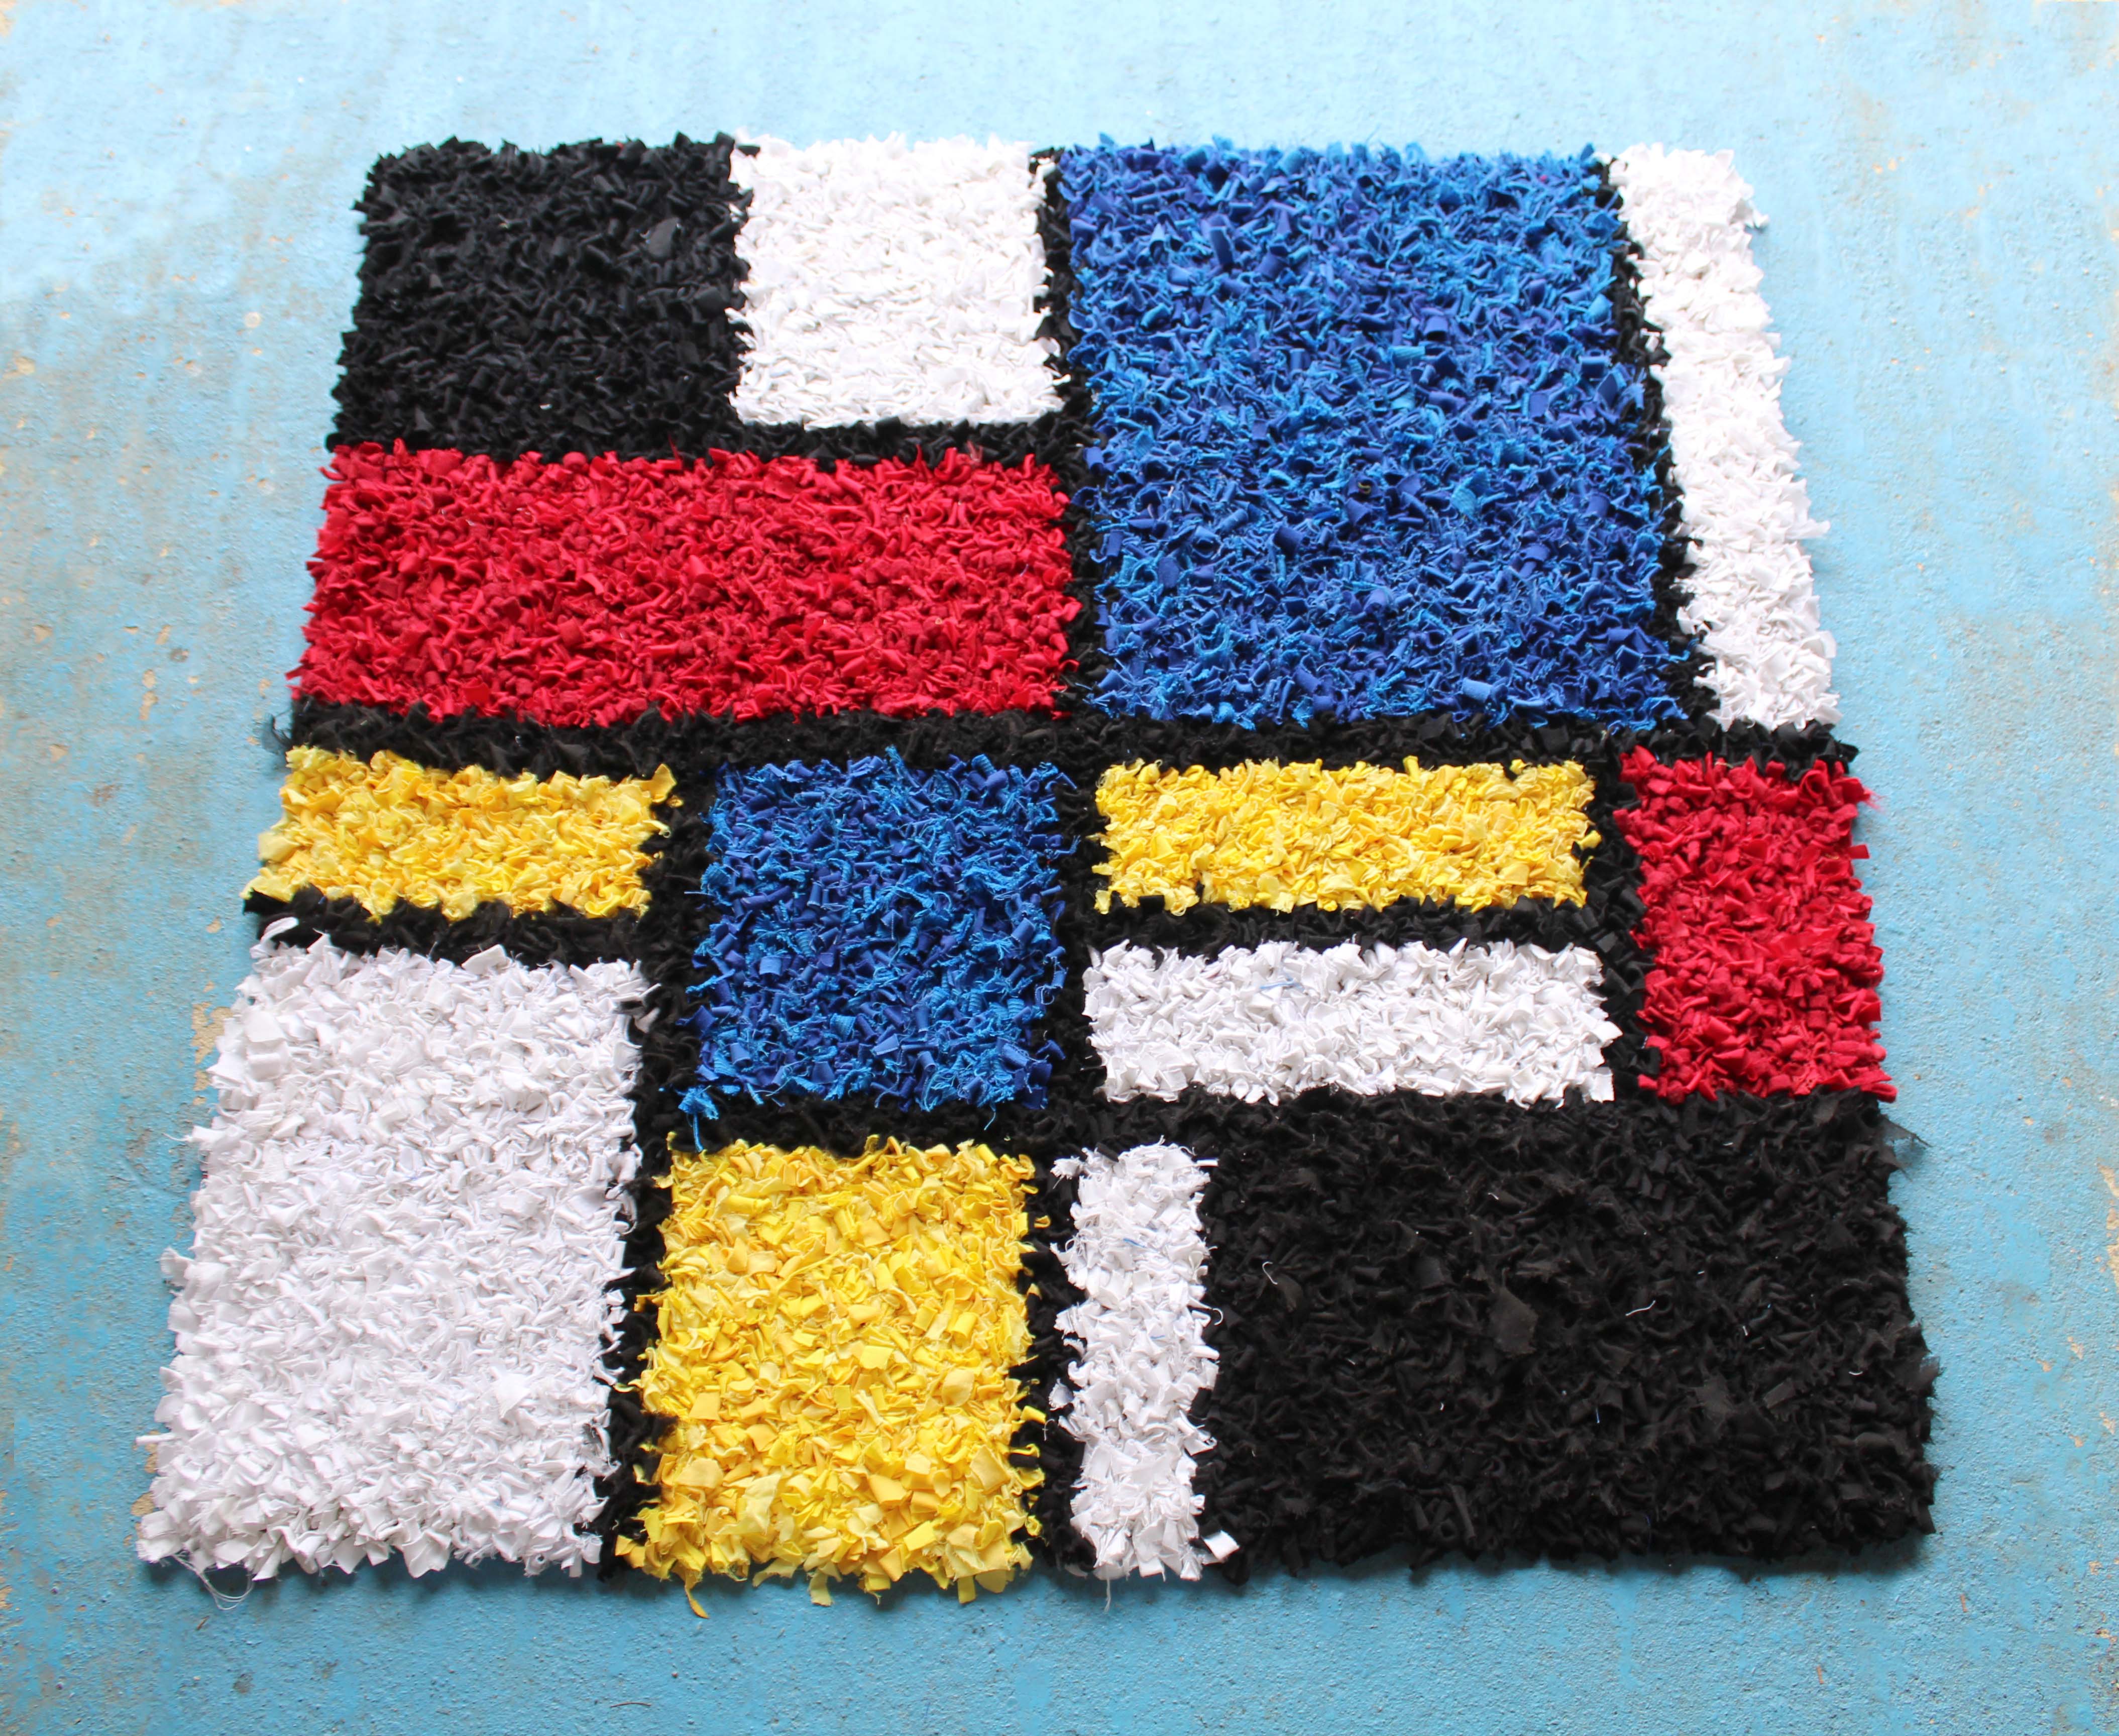 Handmade Mondrian Inspired Rag Rug made using recycled materials and old clothing